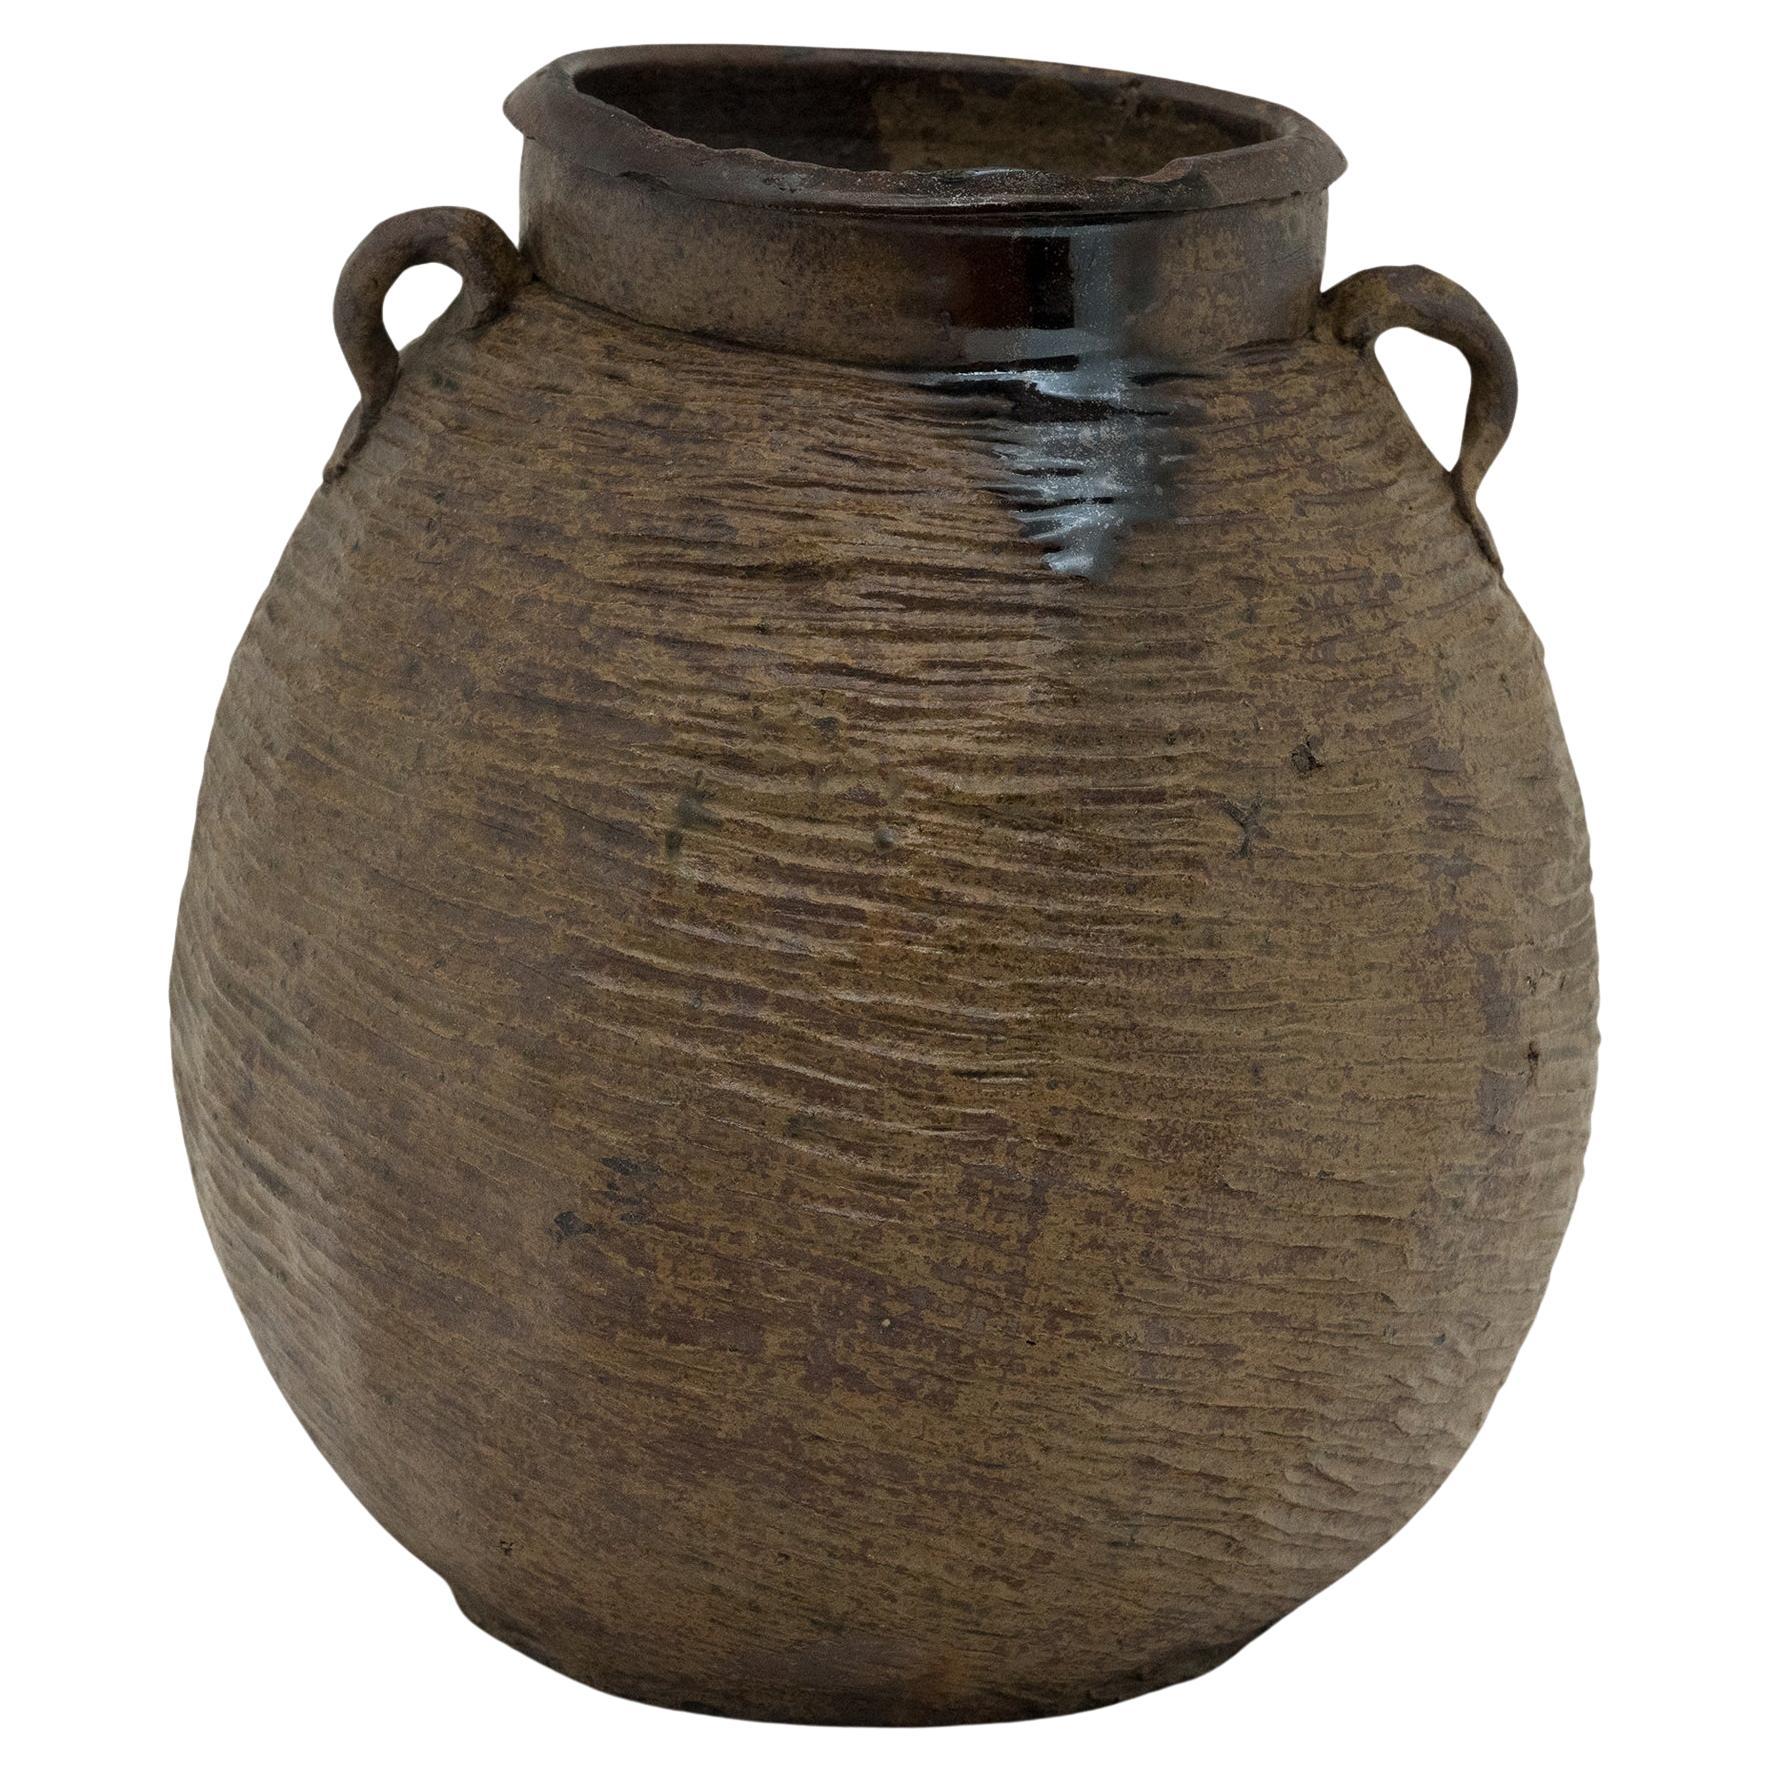 Chinese Yunnan Lobed Pot, c. 1800 For Sale